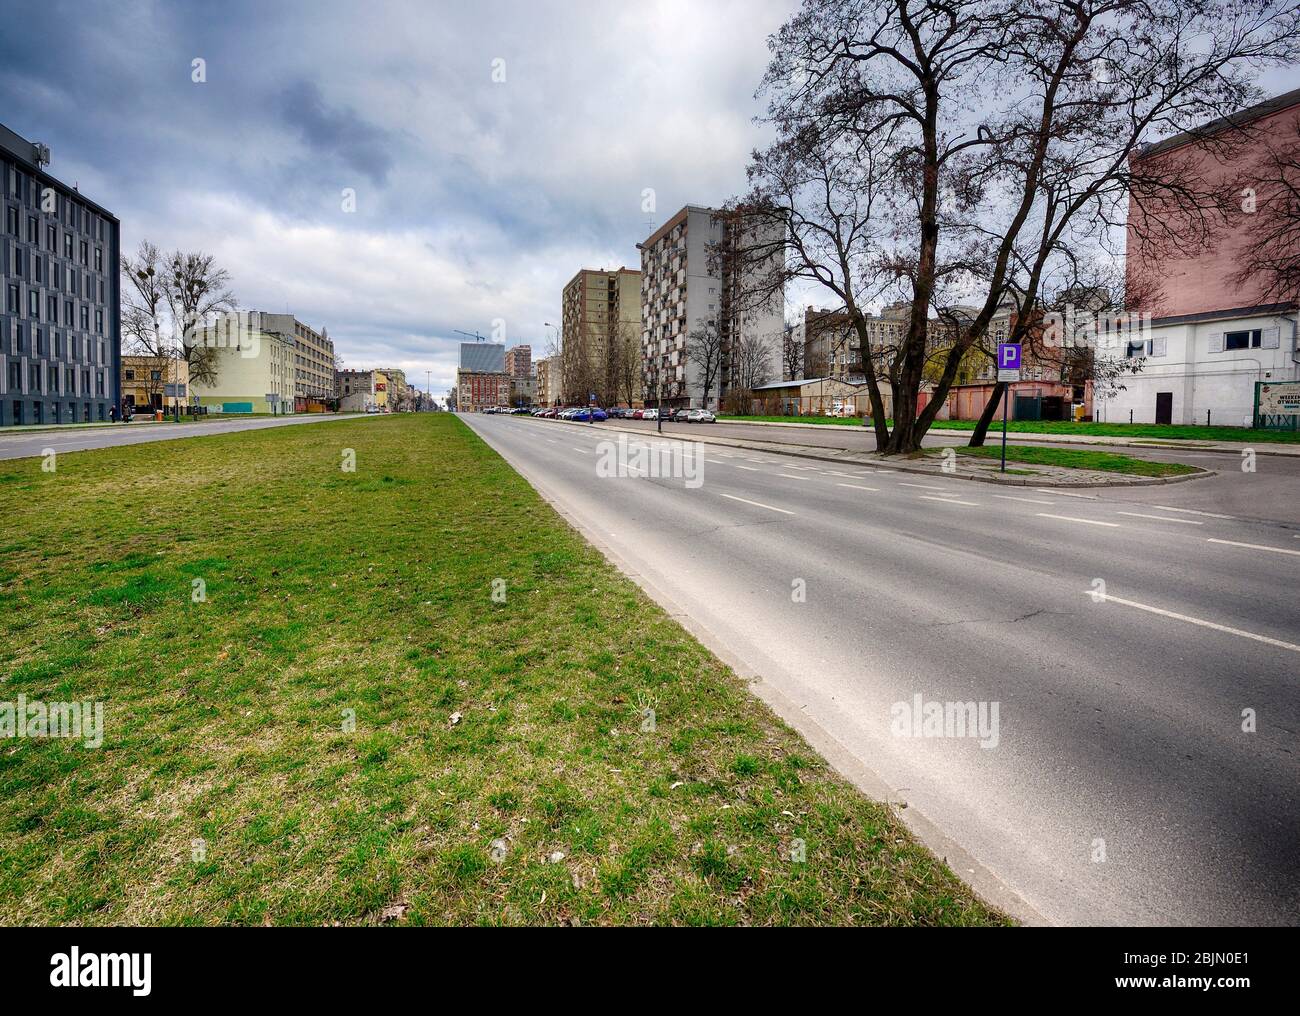 Europe, Poland, Lodz, March 2020, empty streets of city center during the coronavirus pandemic. Stock Photo